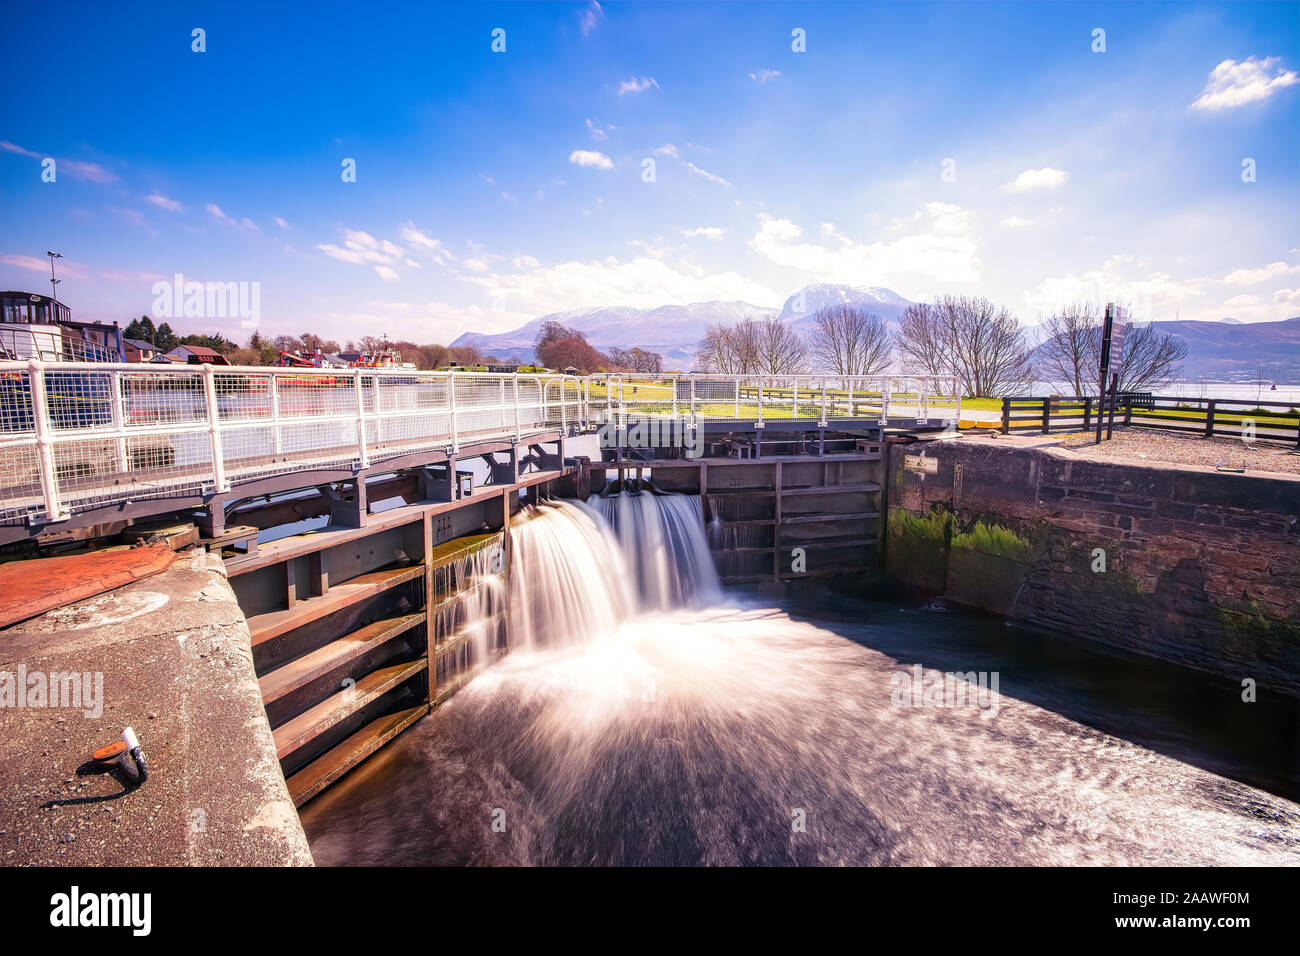 Lock gates at Caledonian Canal with Ben Nevis in background, Highlands, Scotland, UK Stock Photo